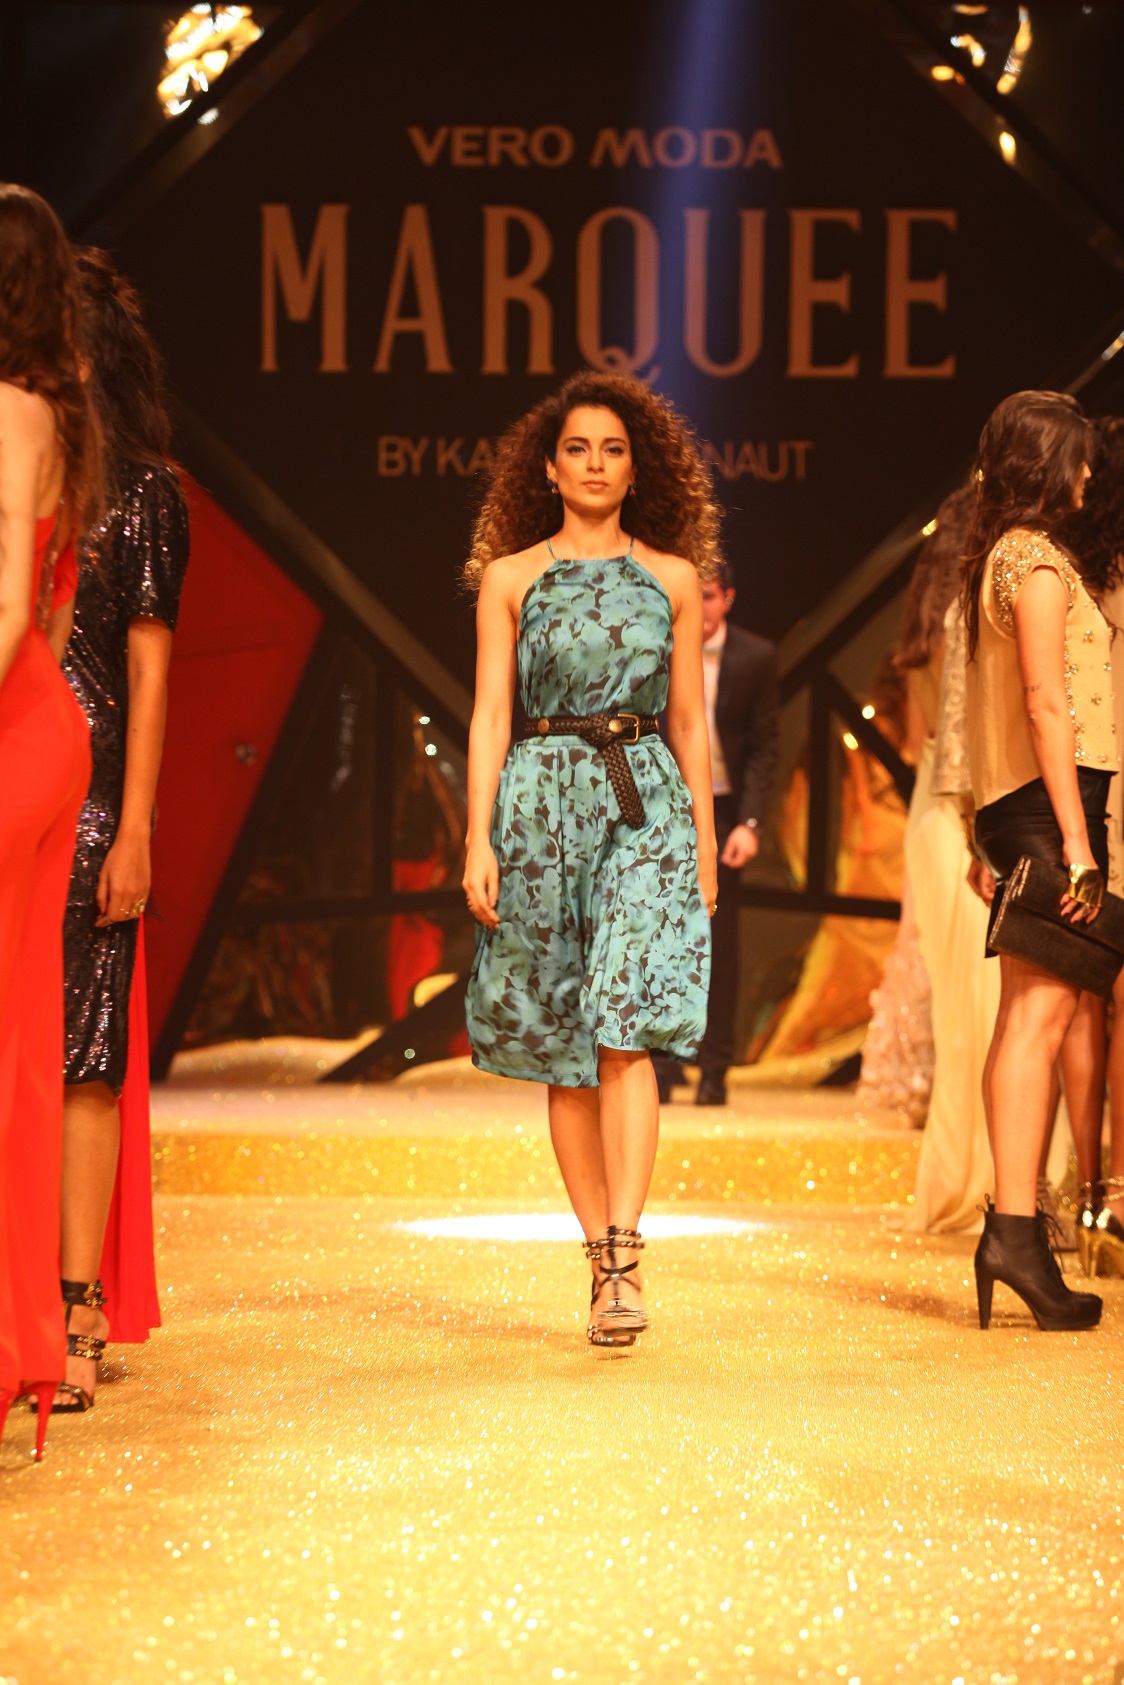 Actress turned designer Kangana Ranaut at the launch event of her VERO MODA MARQUEE collection